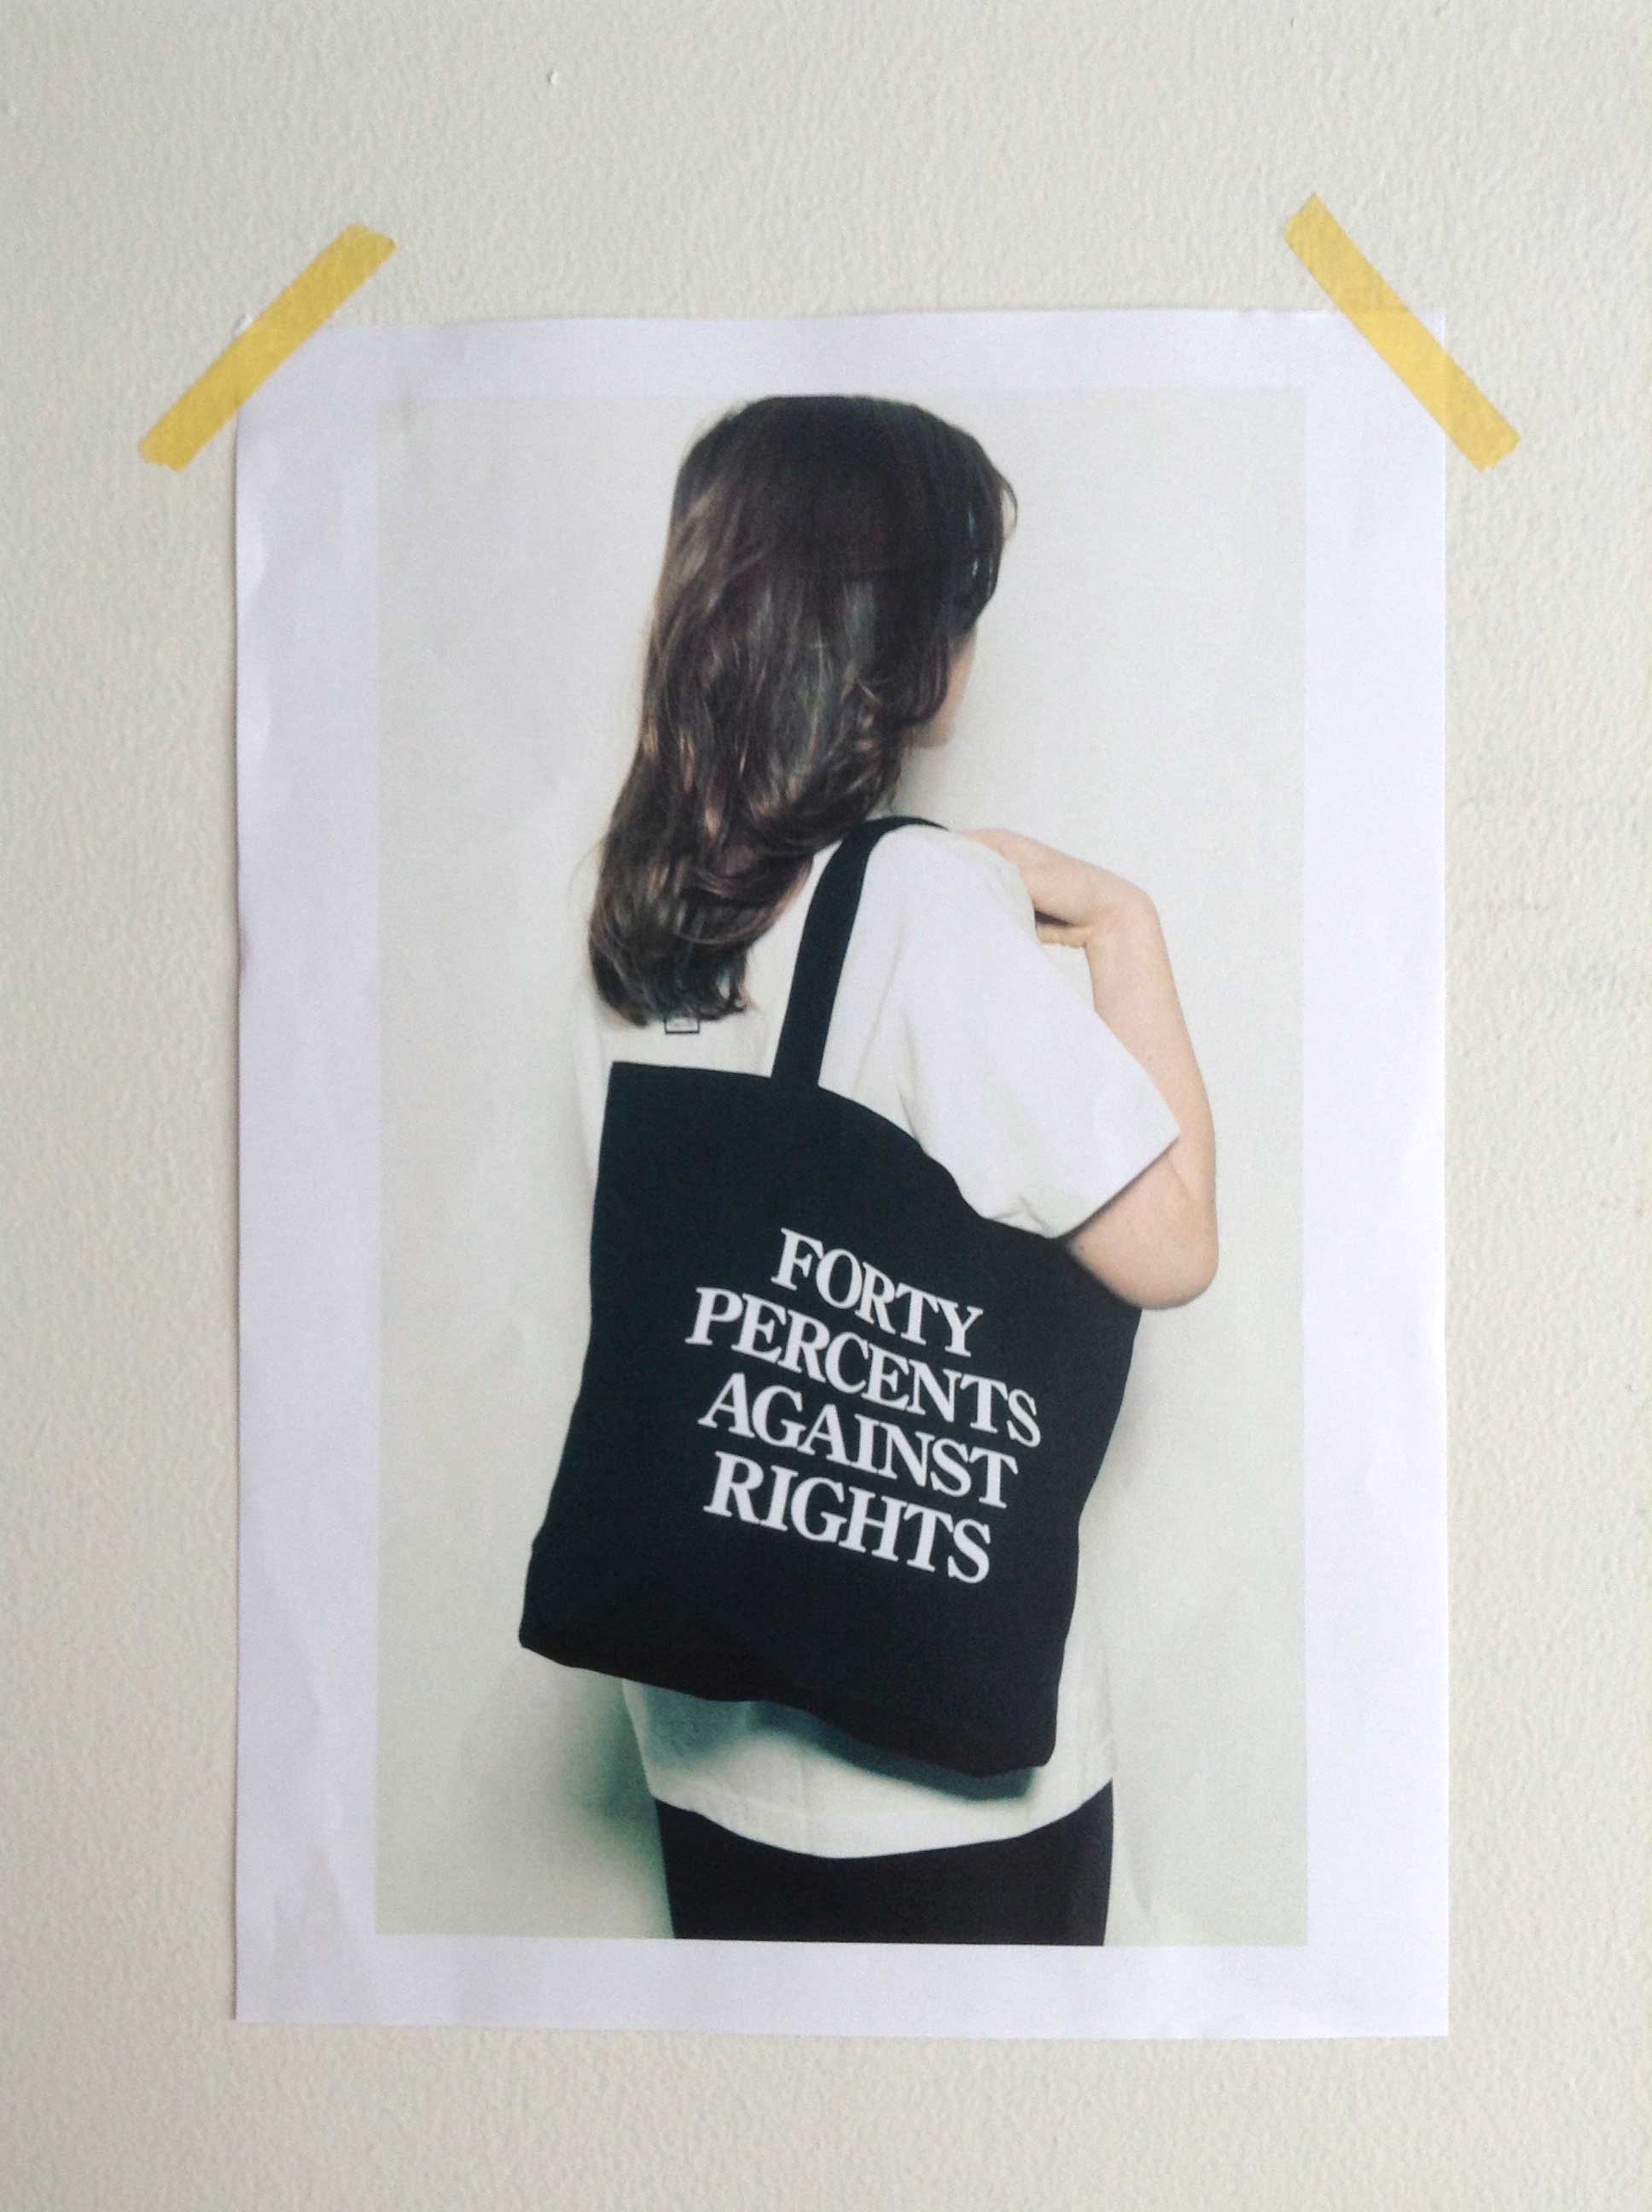 Forty Percents Against Rights Is Finally Going To Be Available